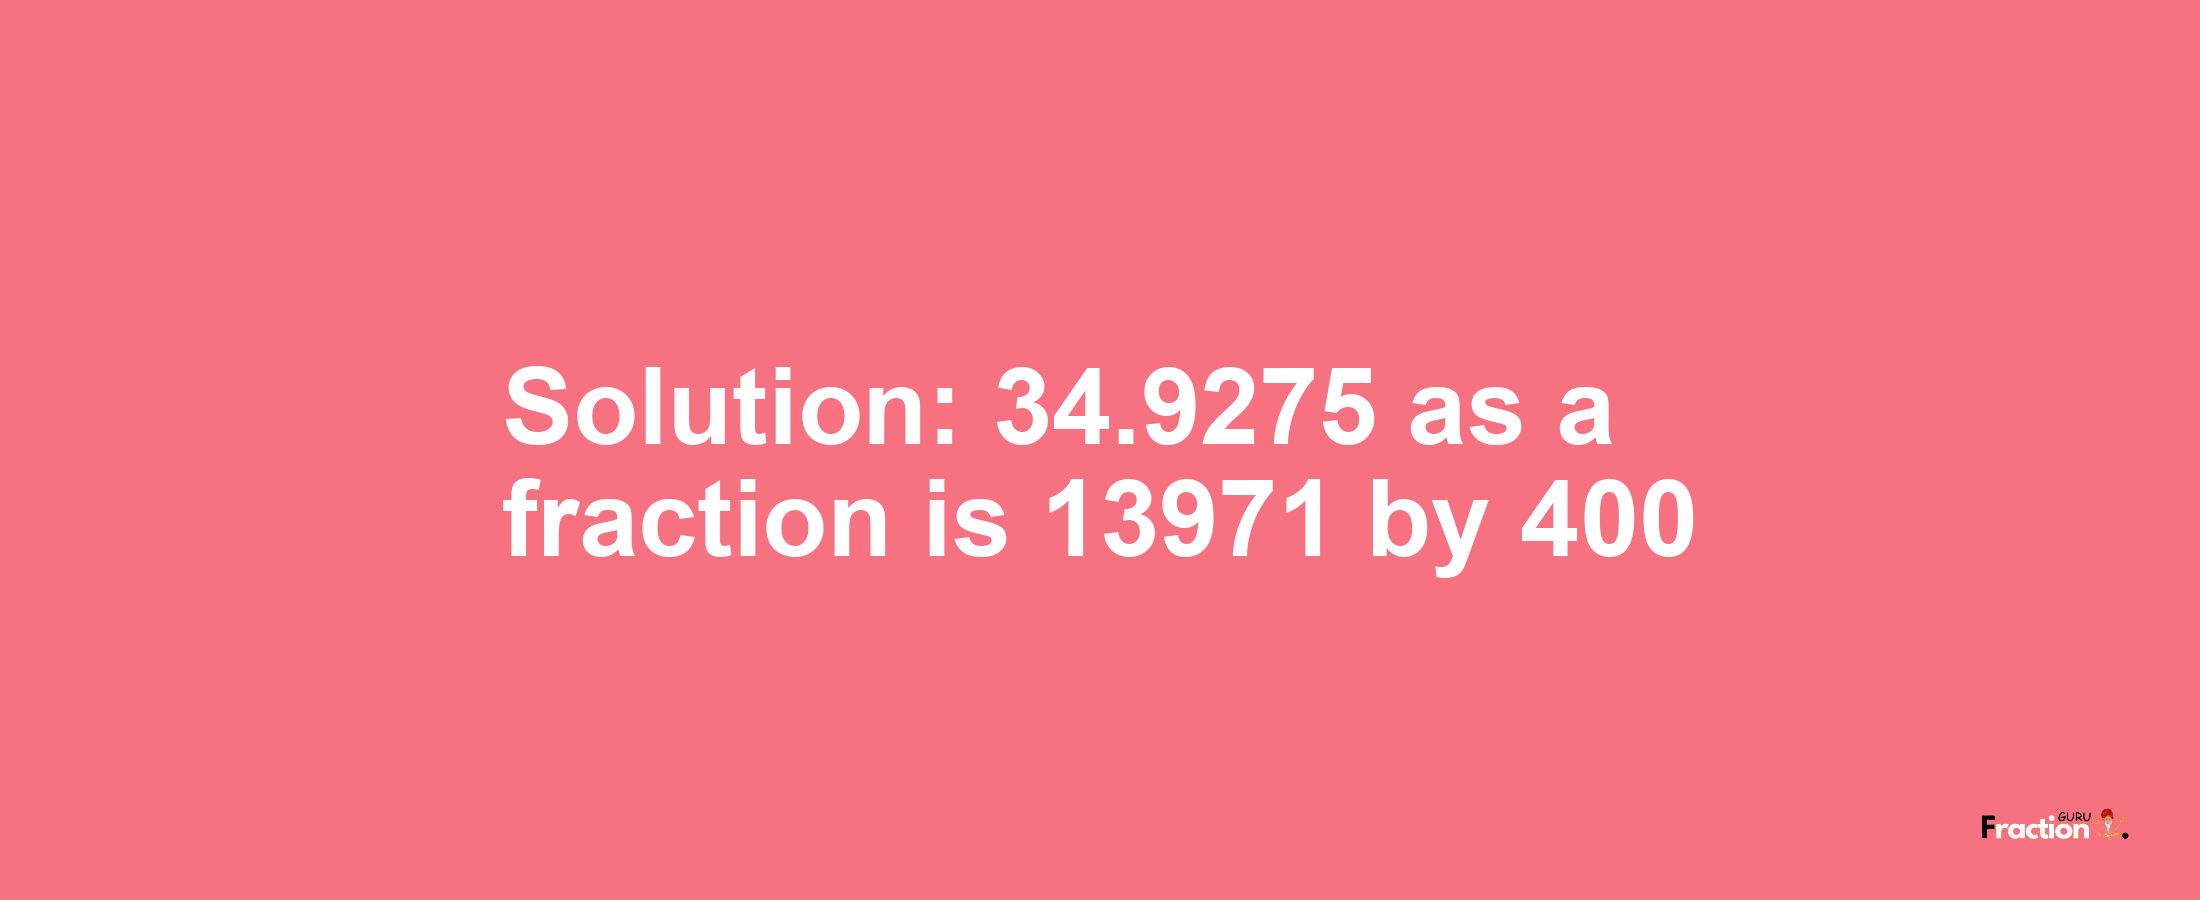 Solution:34.9275 as a fraction is 13971/400